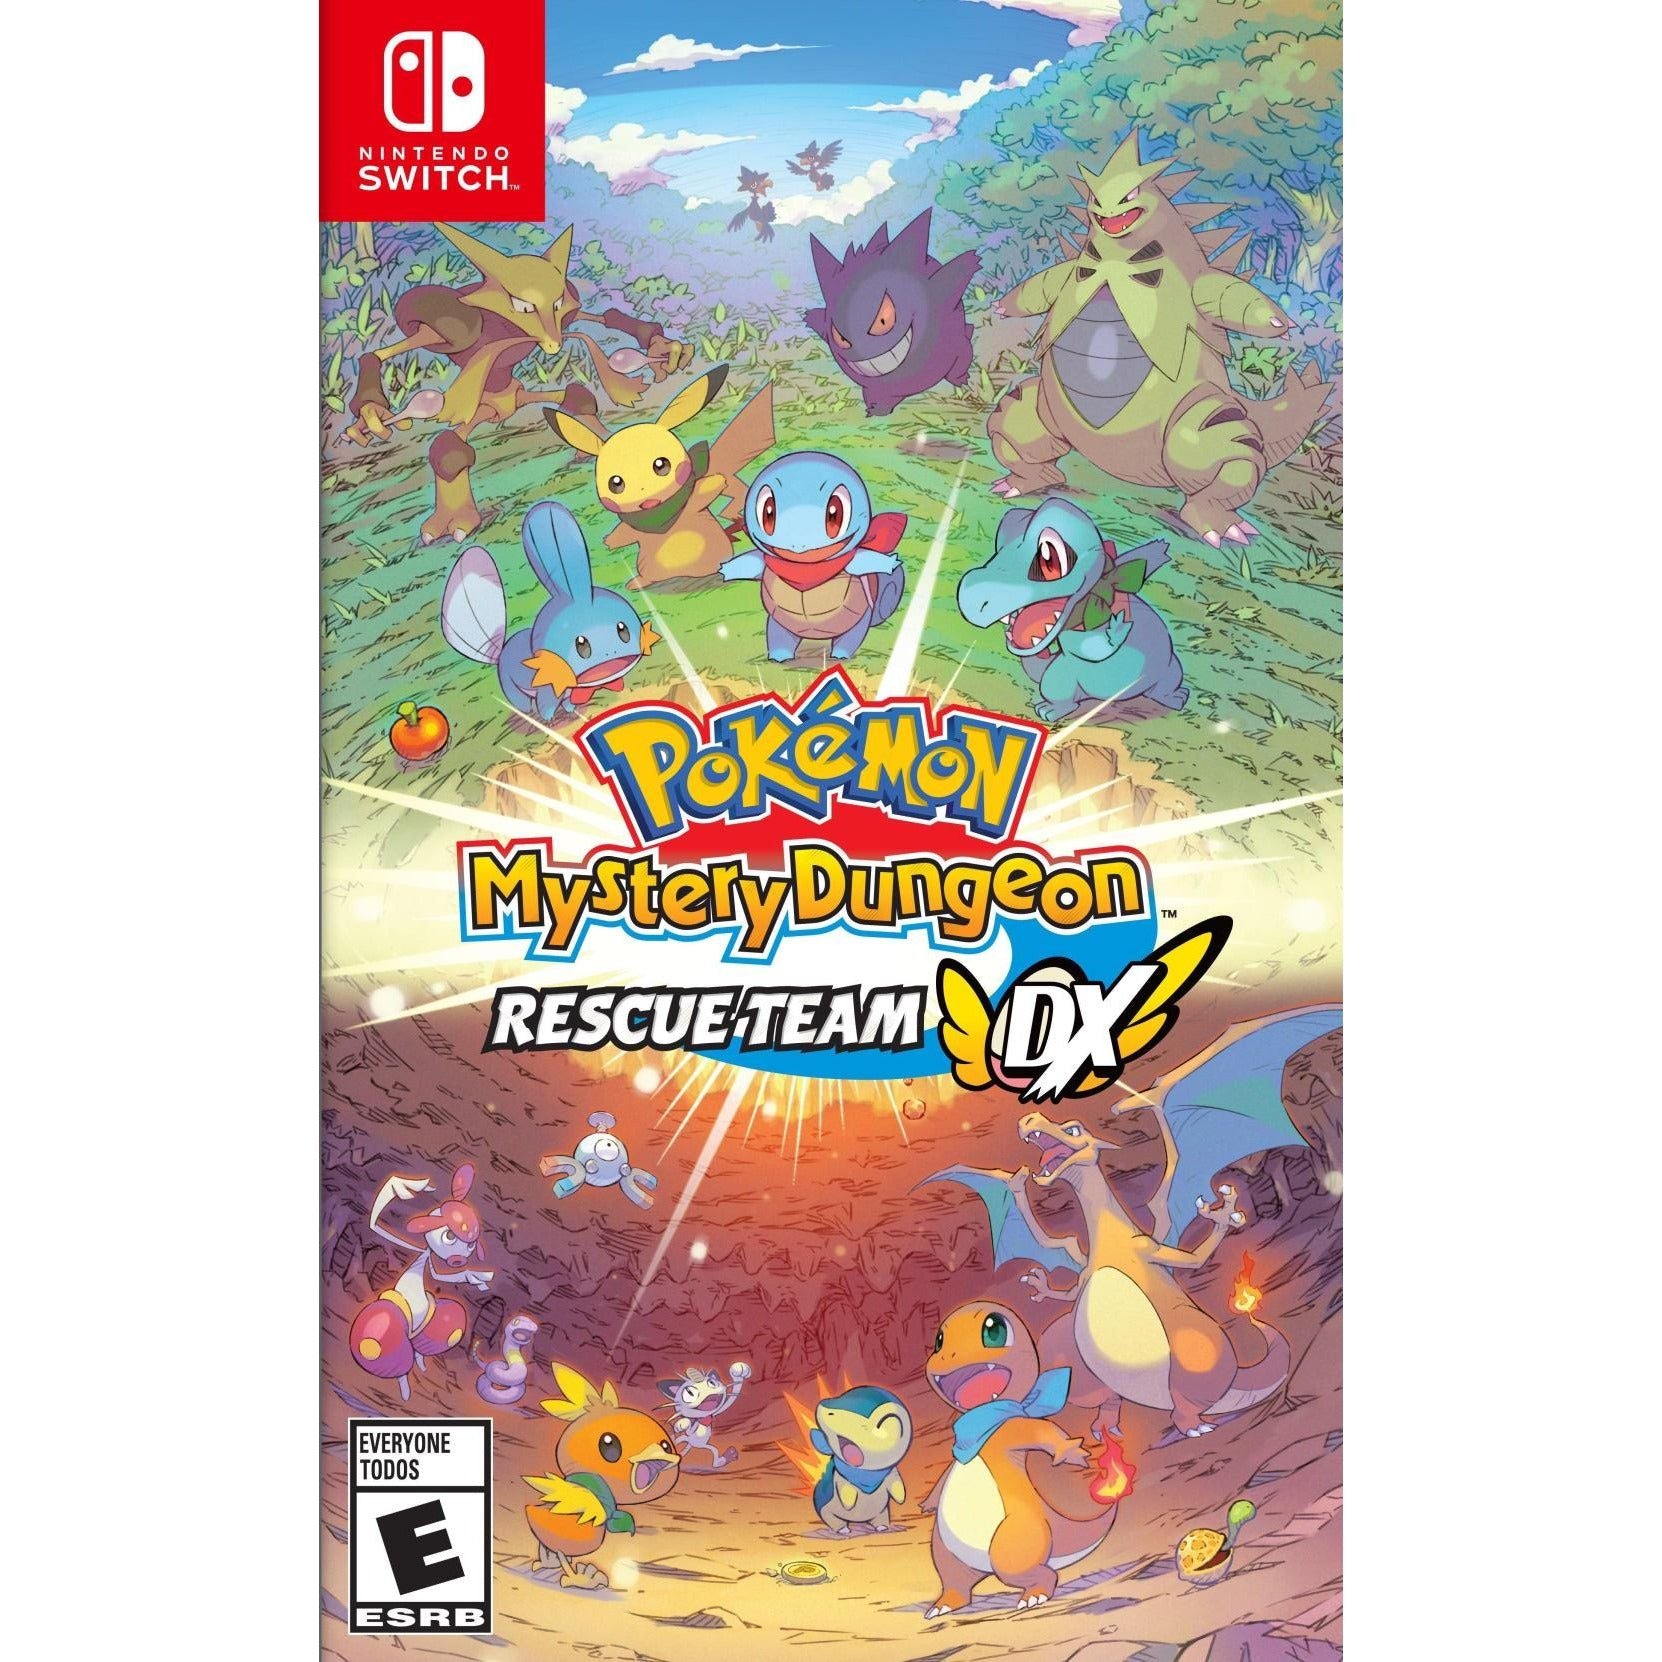 Switch - Pokemon Mystery Dungeon Rescue Team DX (In Case)